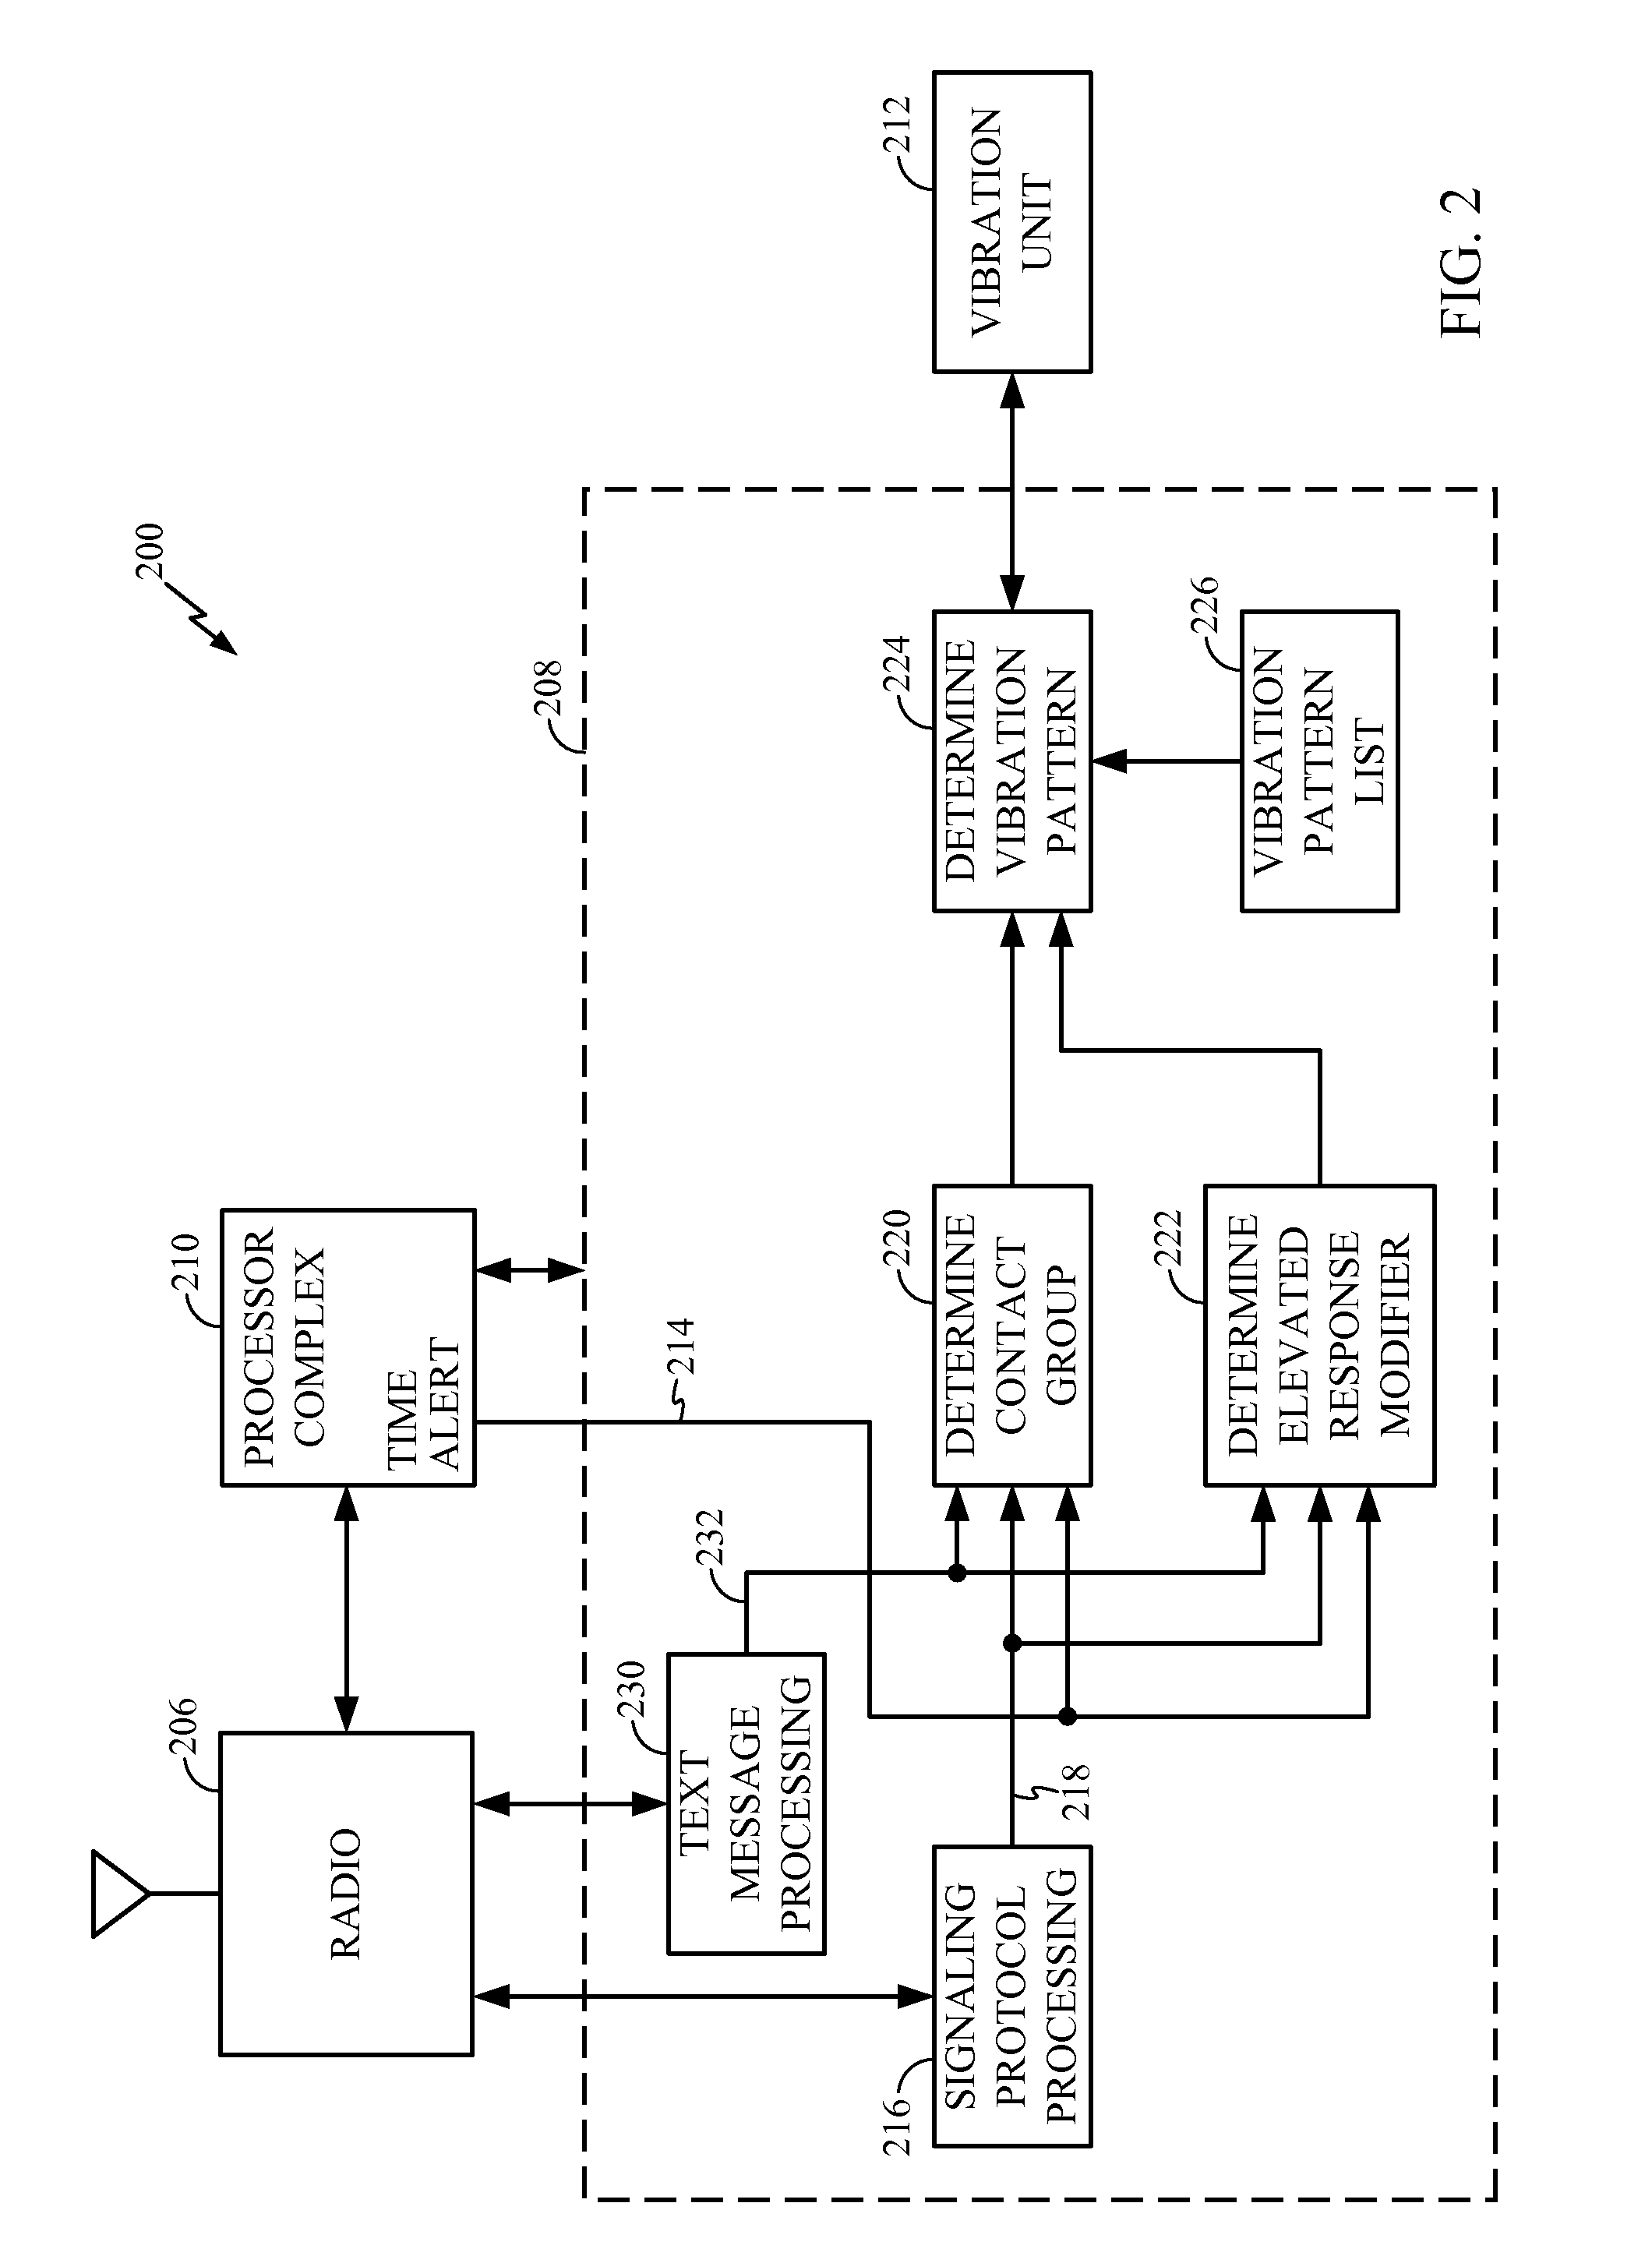 Method of Associating Groups of Classified Source Addresses with Vibration Patterns